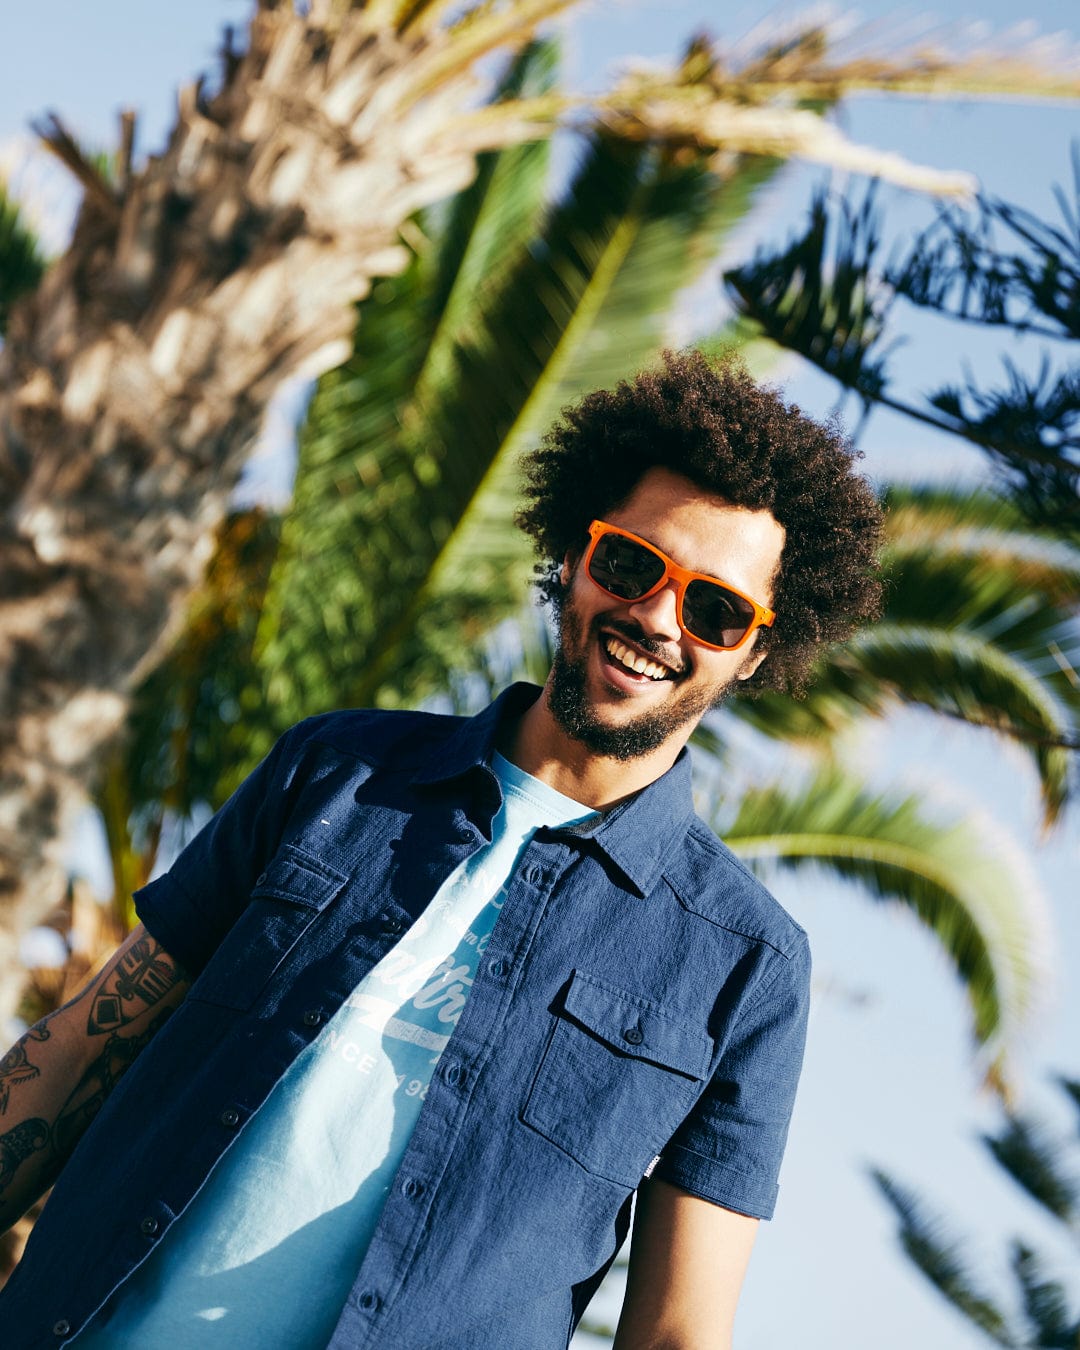 A young man with an afro wearing Saltrock Ranger polarised sunglasses in orange and a denim shirt smiles outdoors with palm trees in the background.